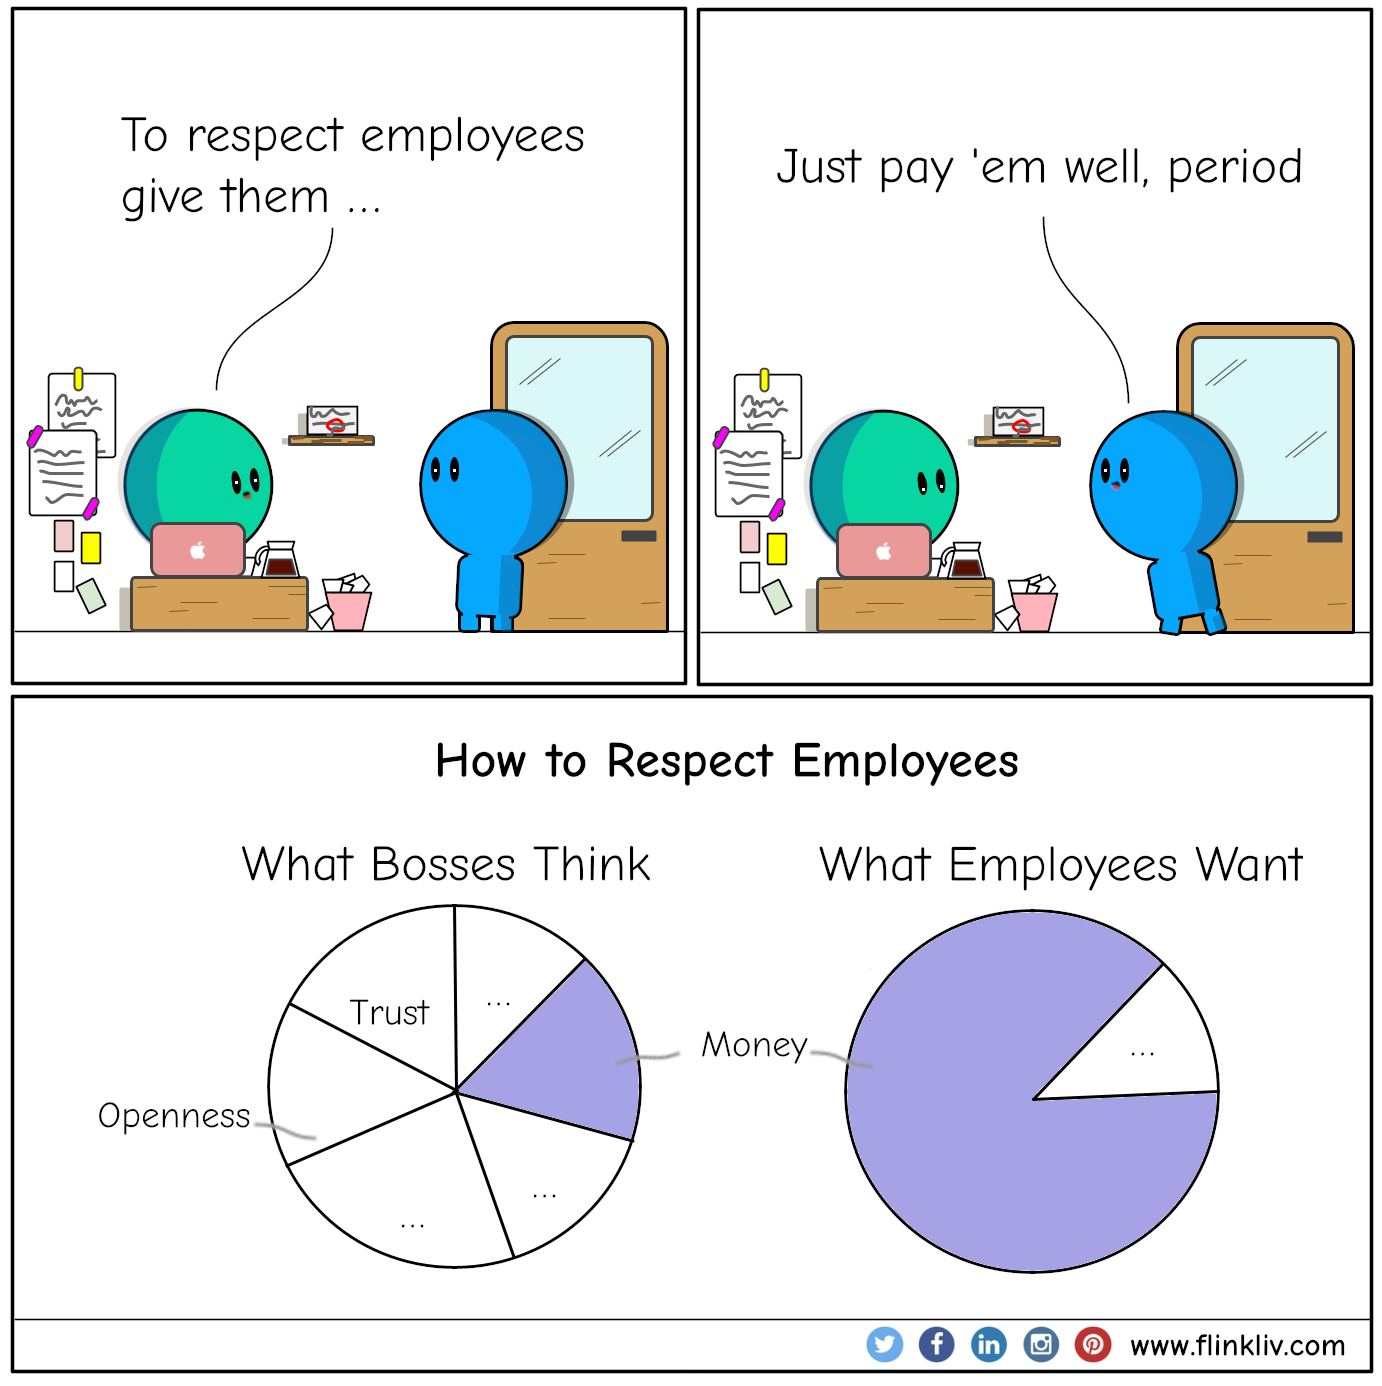 Conversation between A and B about how to respect employees.
			A: To respect employees, give them …
			B: Just pay 'em well, period.   
              